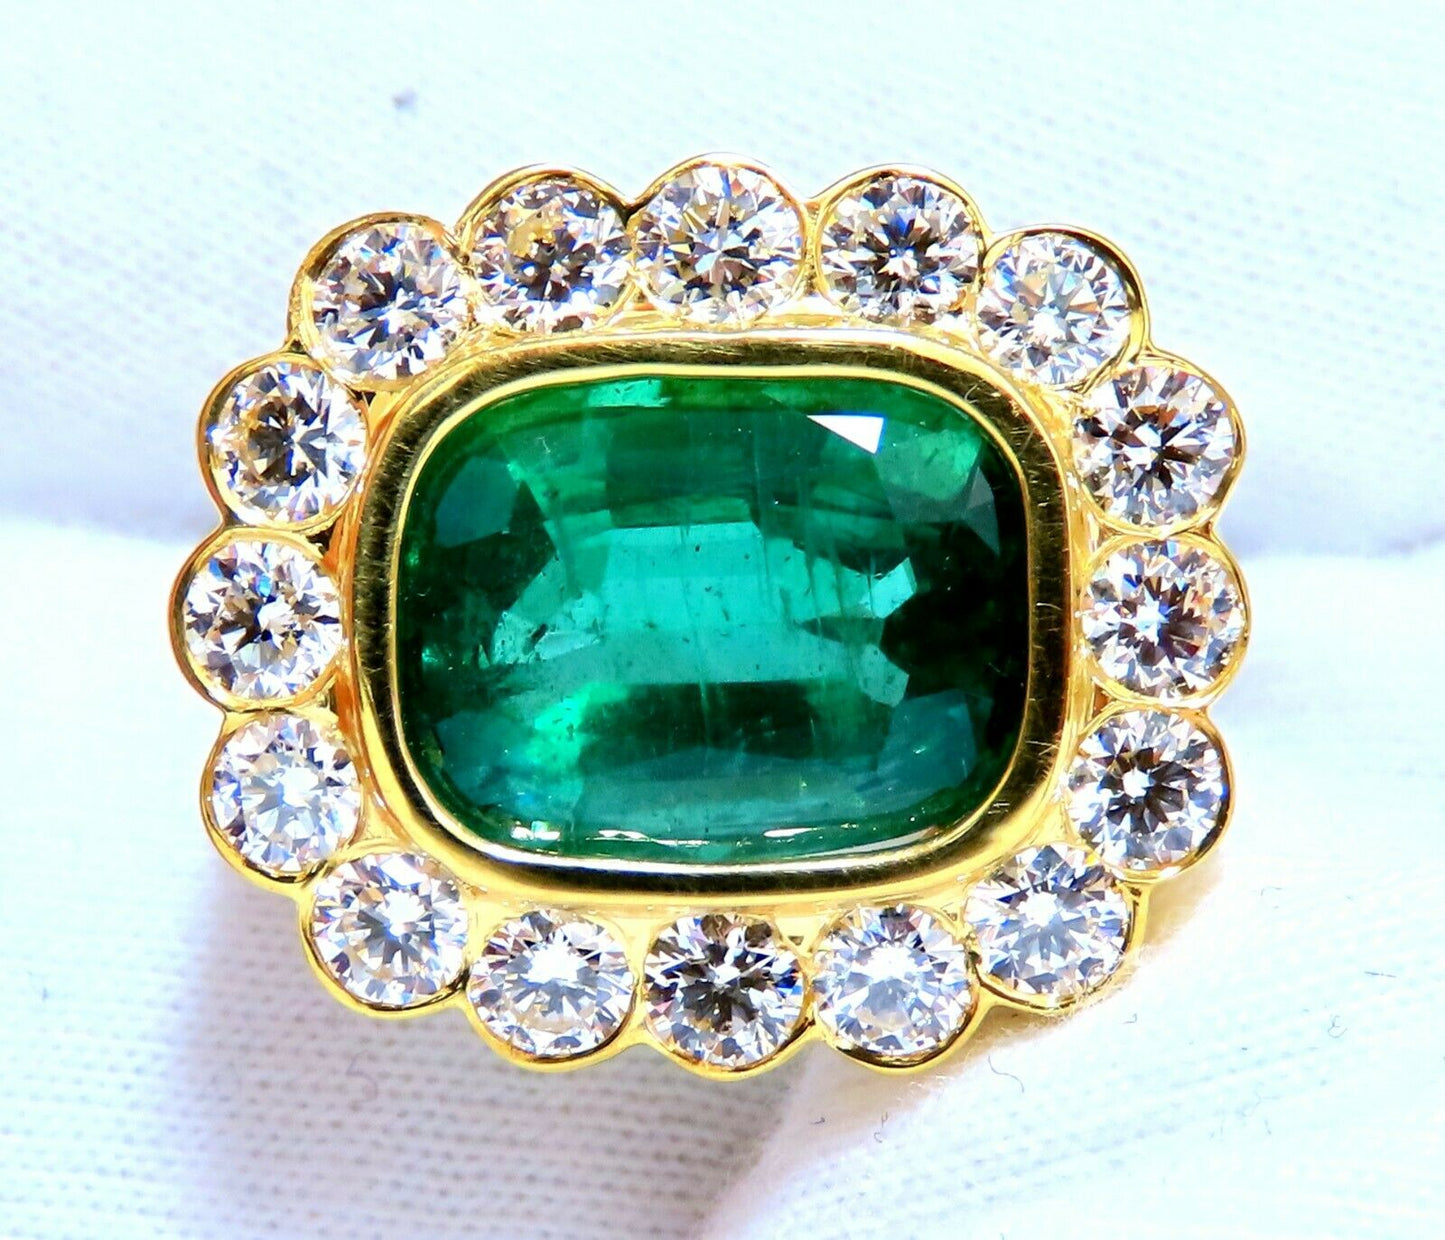 GIA Certified: 4.70ct Natural Emerald Diamonds Ring 18kt Cluster (F2)